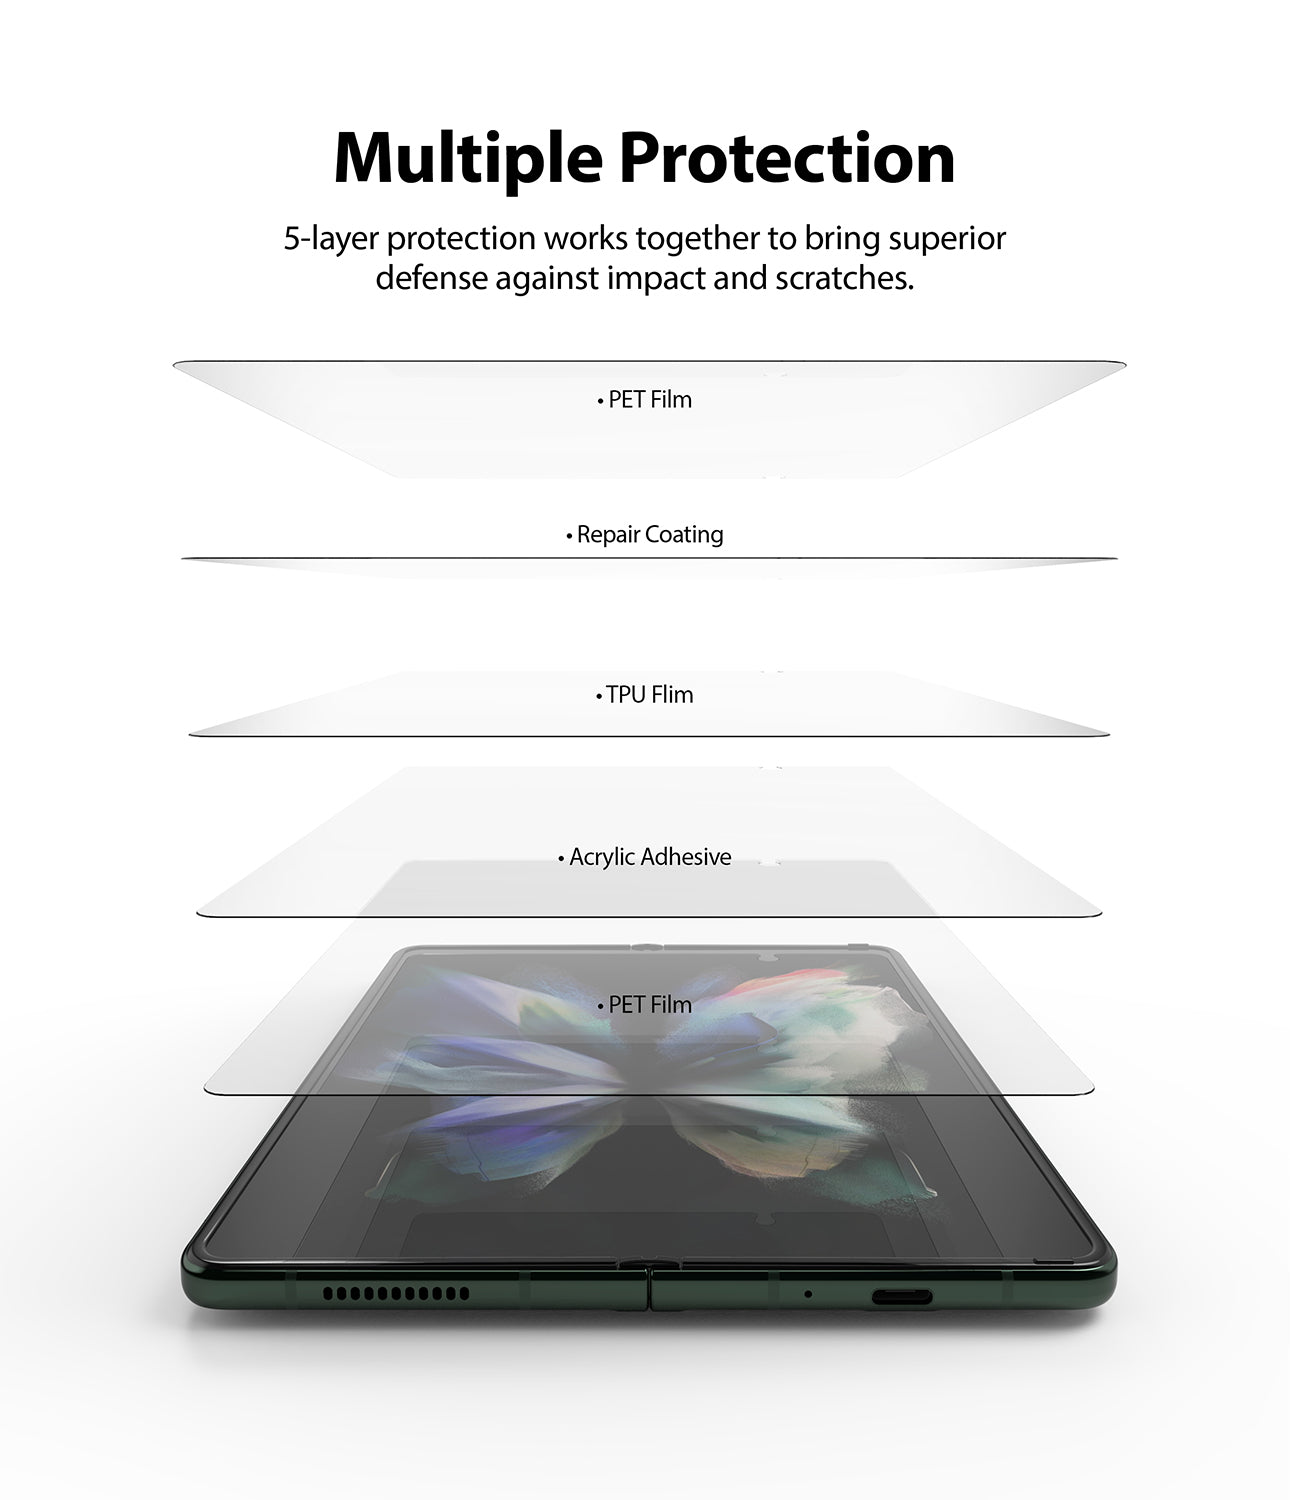 5-layer protection